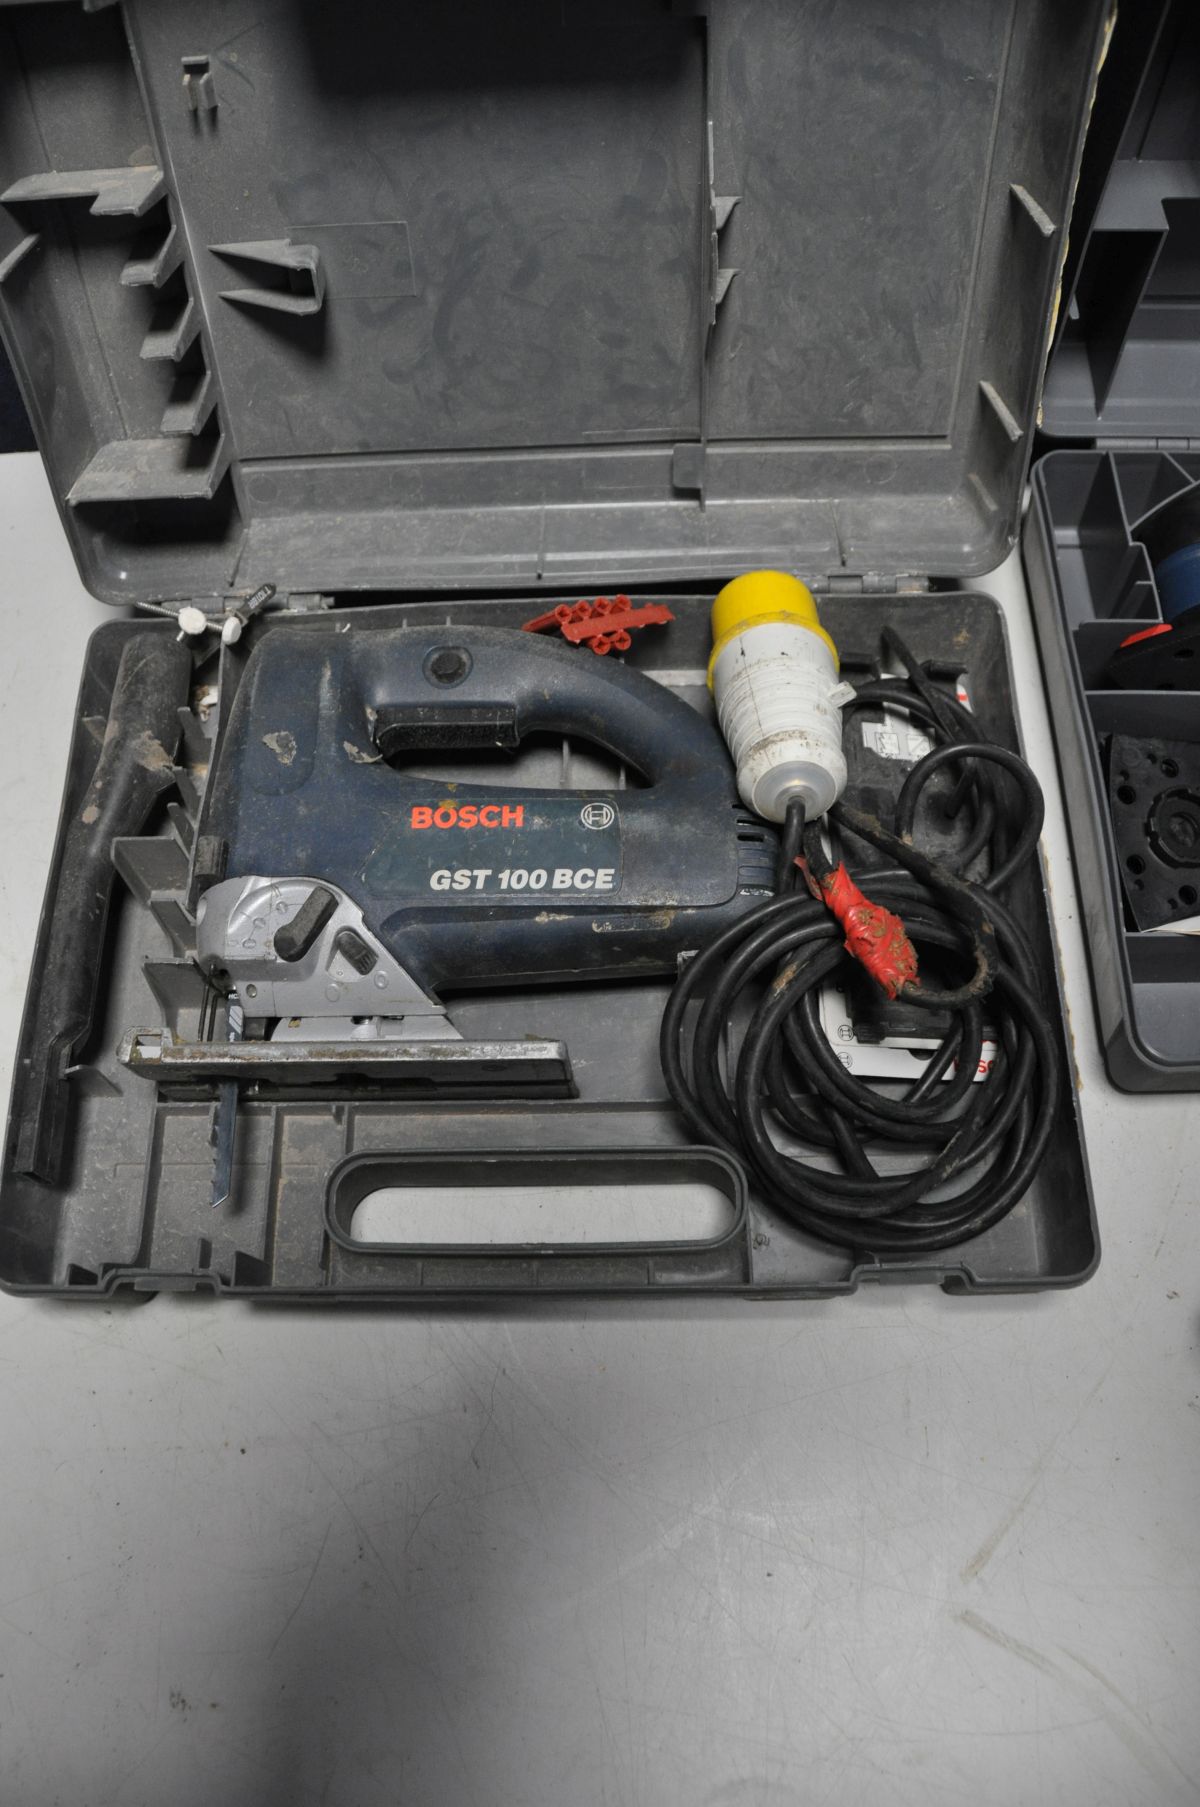 A COLLECTION OF POWERTOOLS to include a Bosch GST85 jigsaw, Bosch GDA280-E sander, Bosch - Image 2 of 5